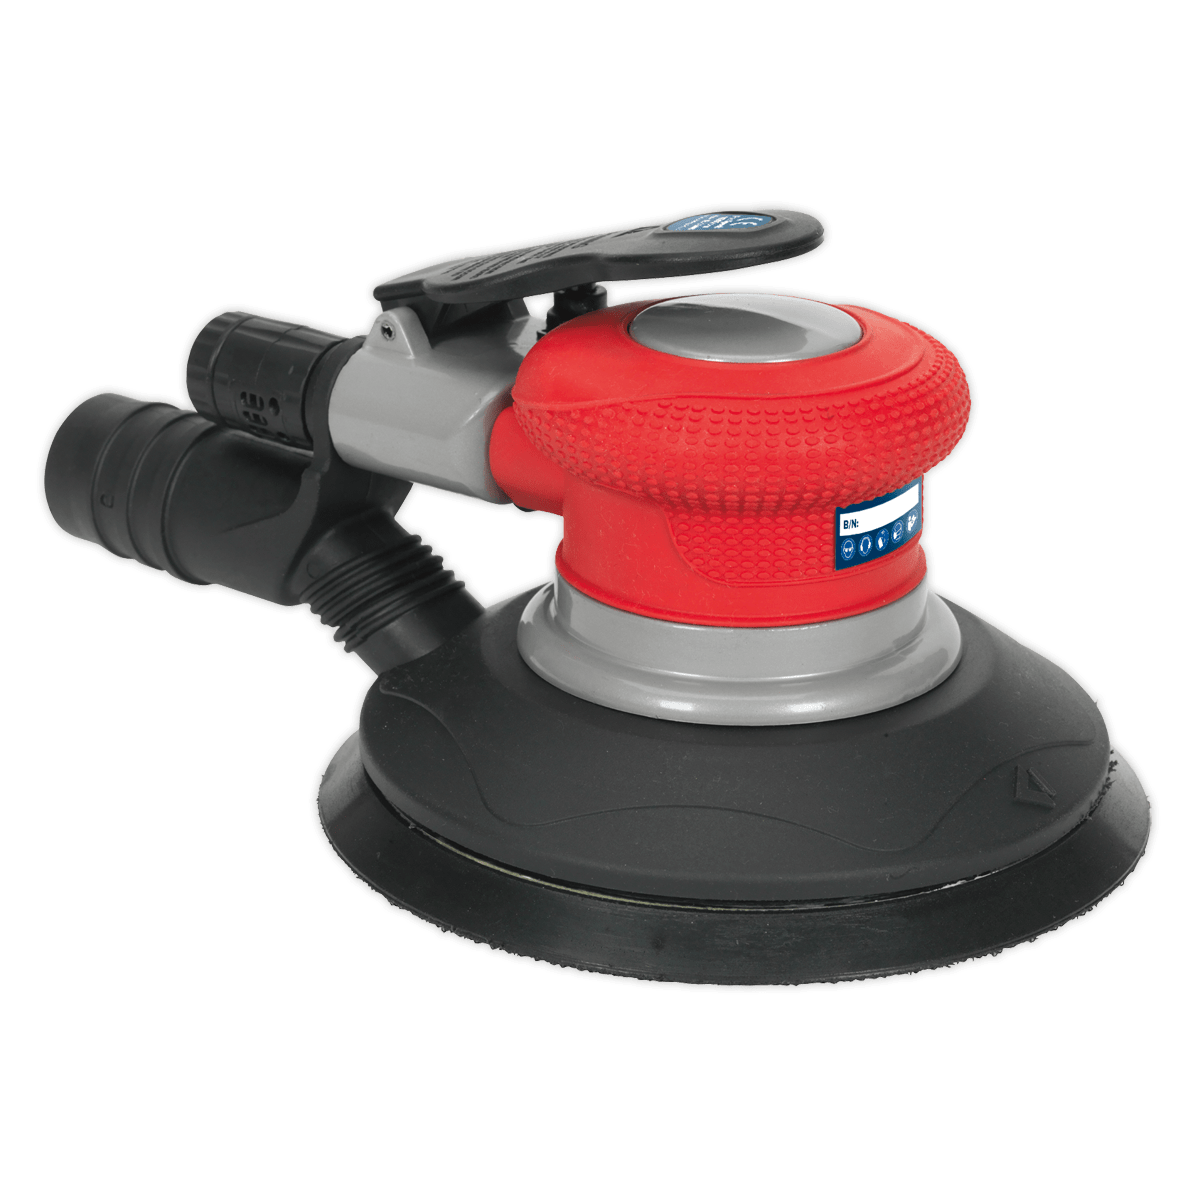 Air Palm Random Orbital Sander ¯150mm Dust-Free | Variable speed control lever for quick adjustment to suit workpiece. | toolforce.ie